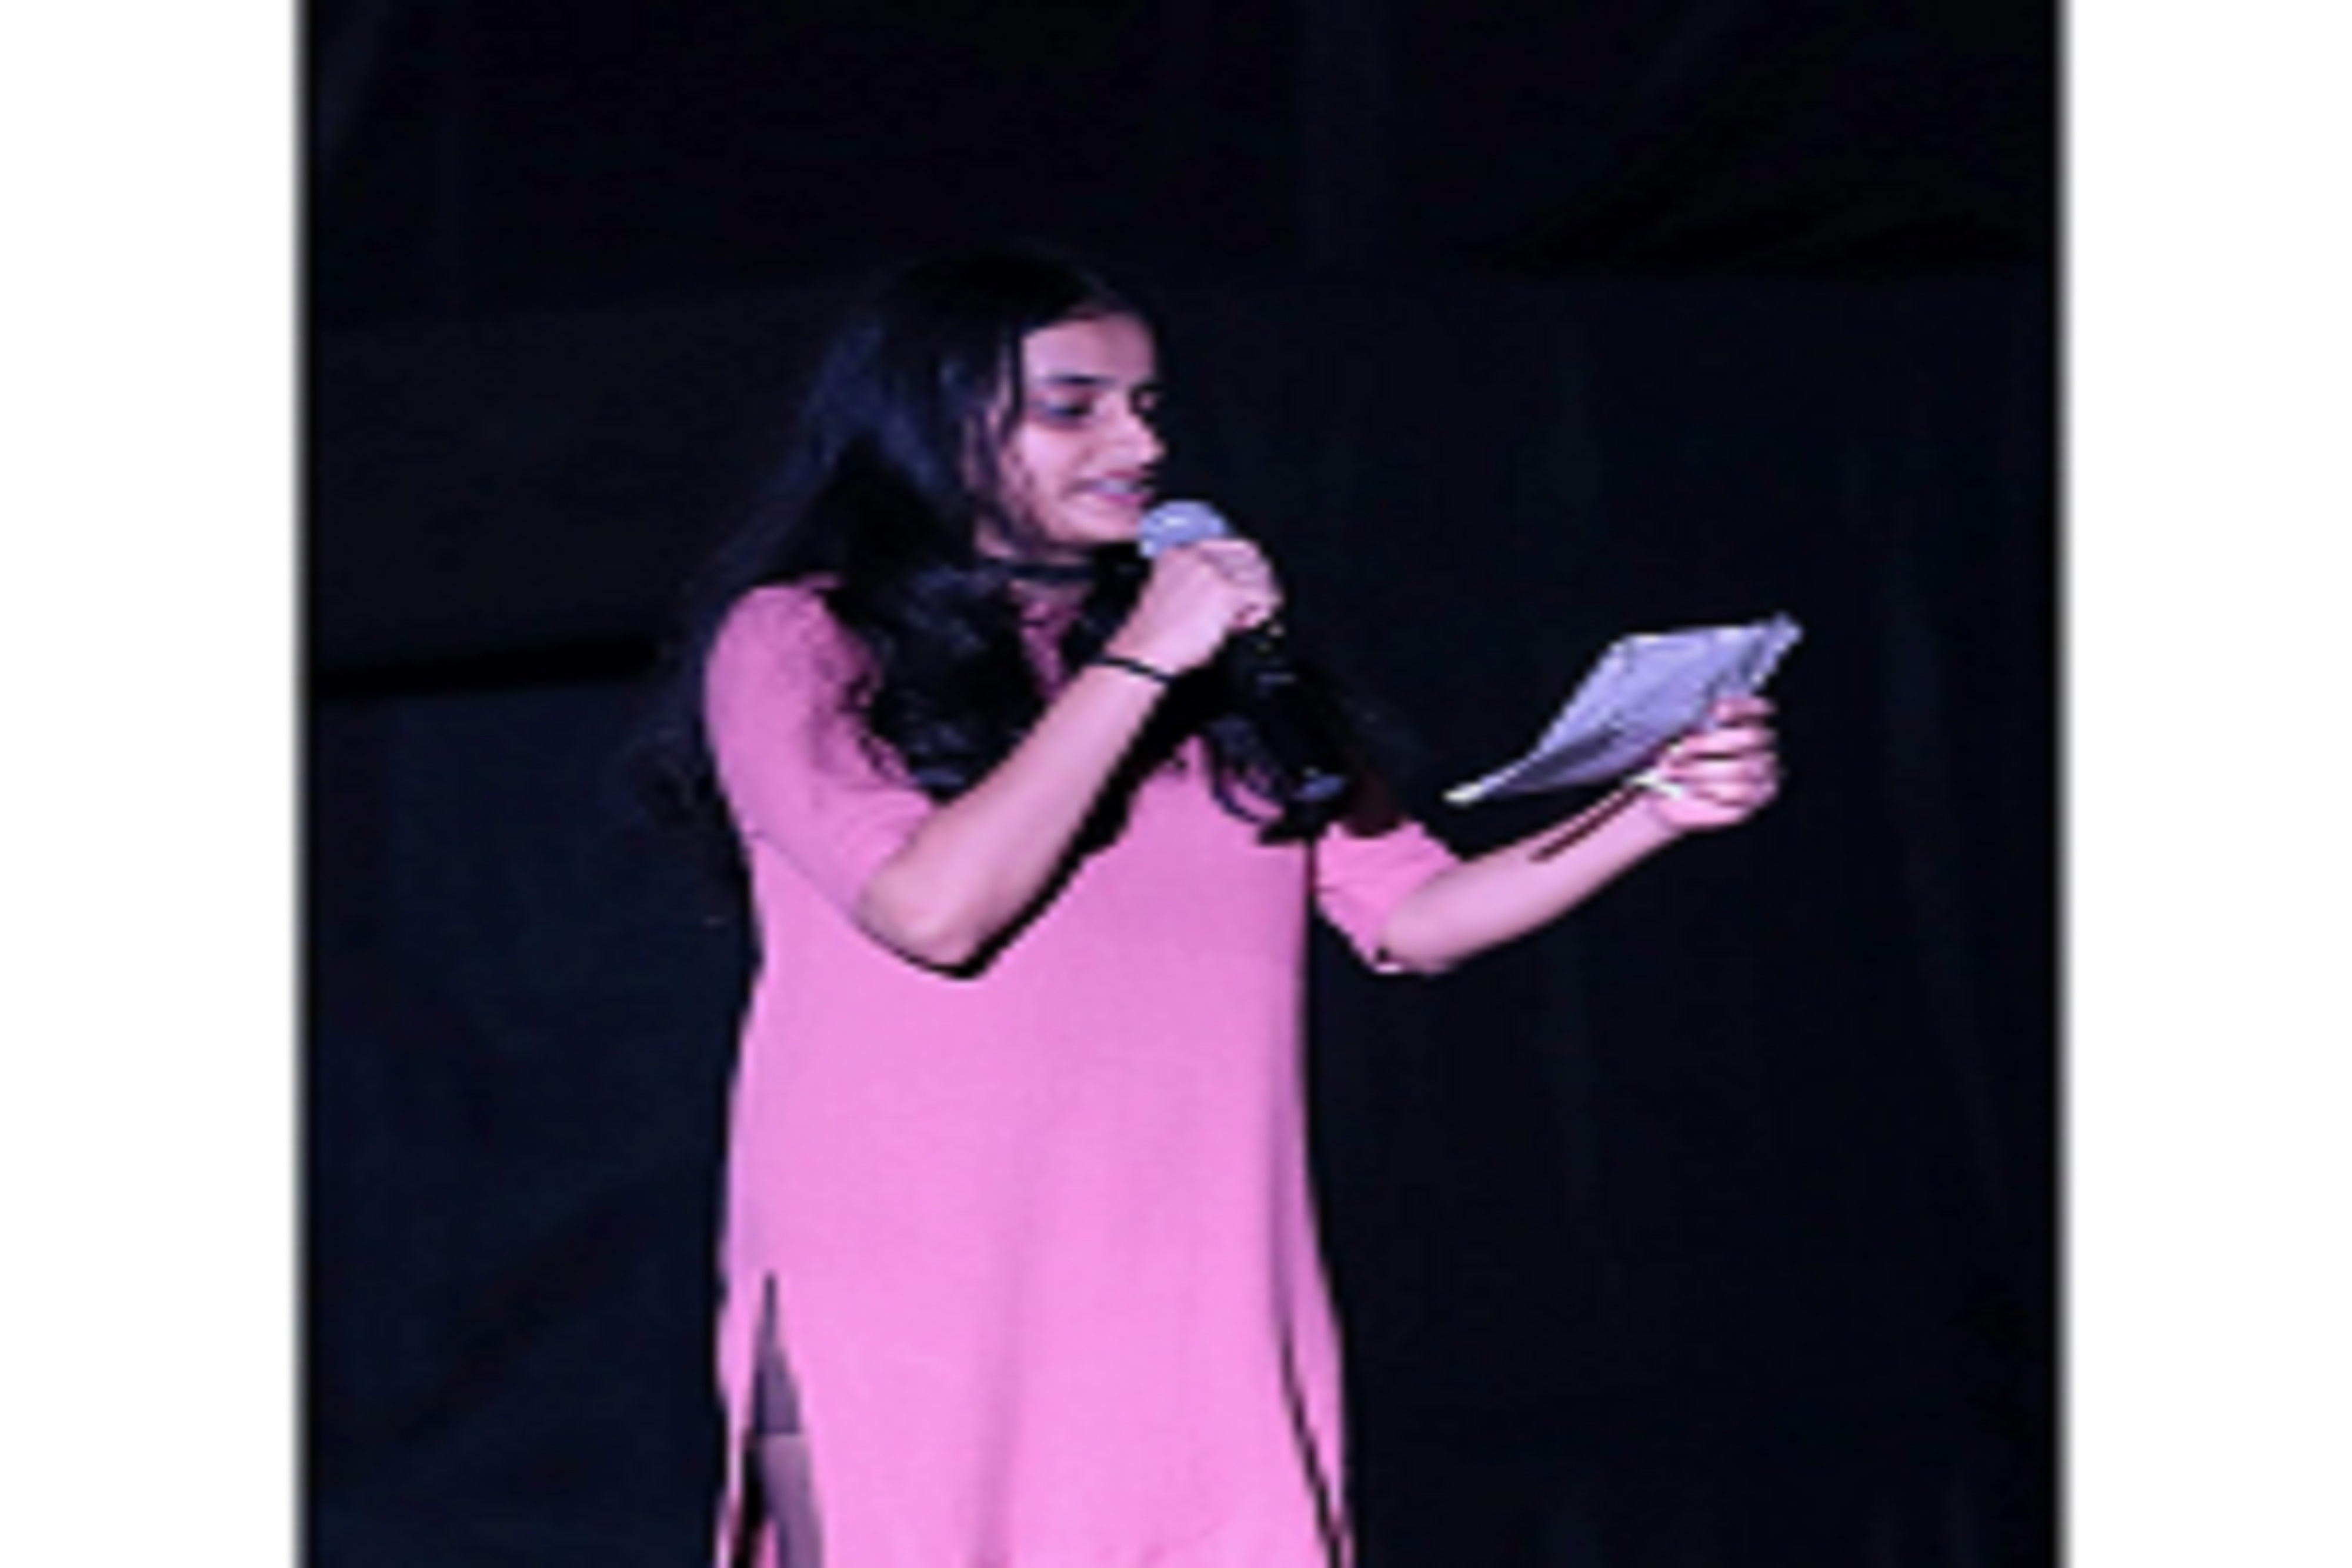 A girl reciting a poem on a stage with mic in her hand